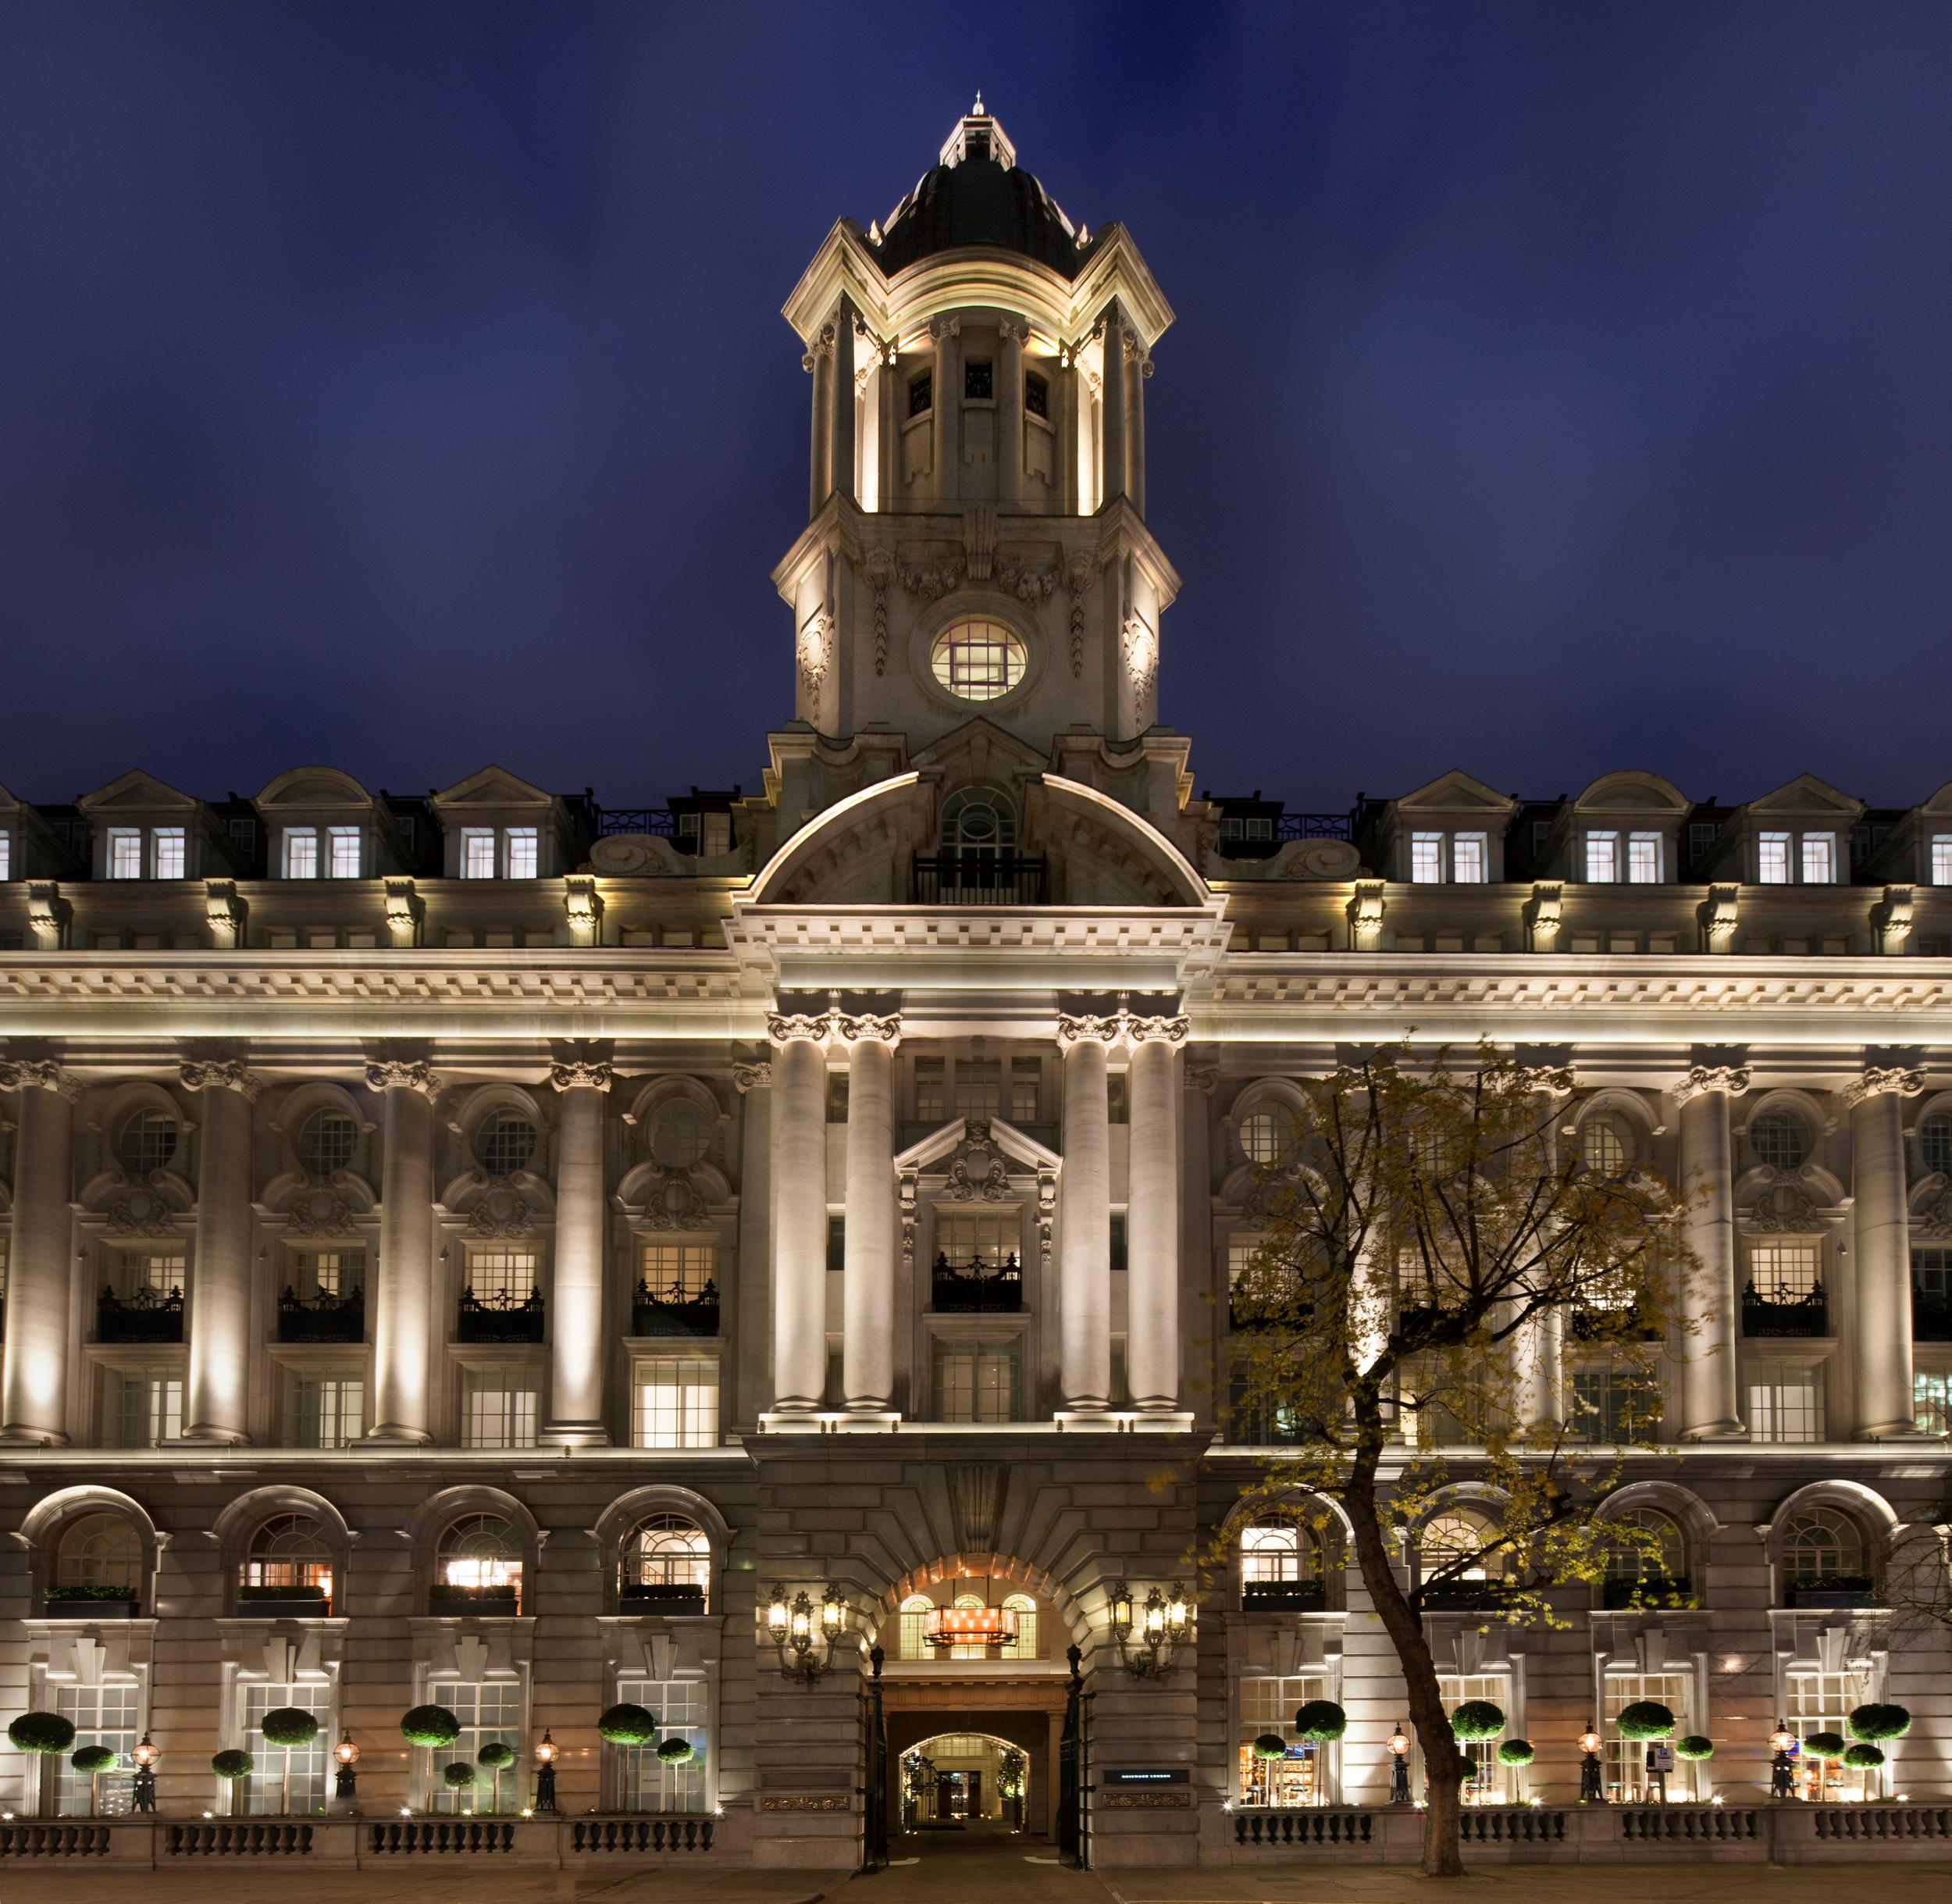 The Rosewood London, housed in a Grade II-listed building, was formerly the headquarters of the Pearl Assurance Company